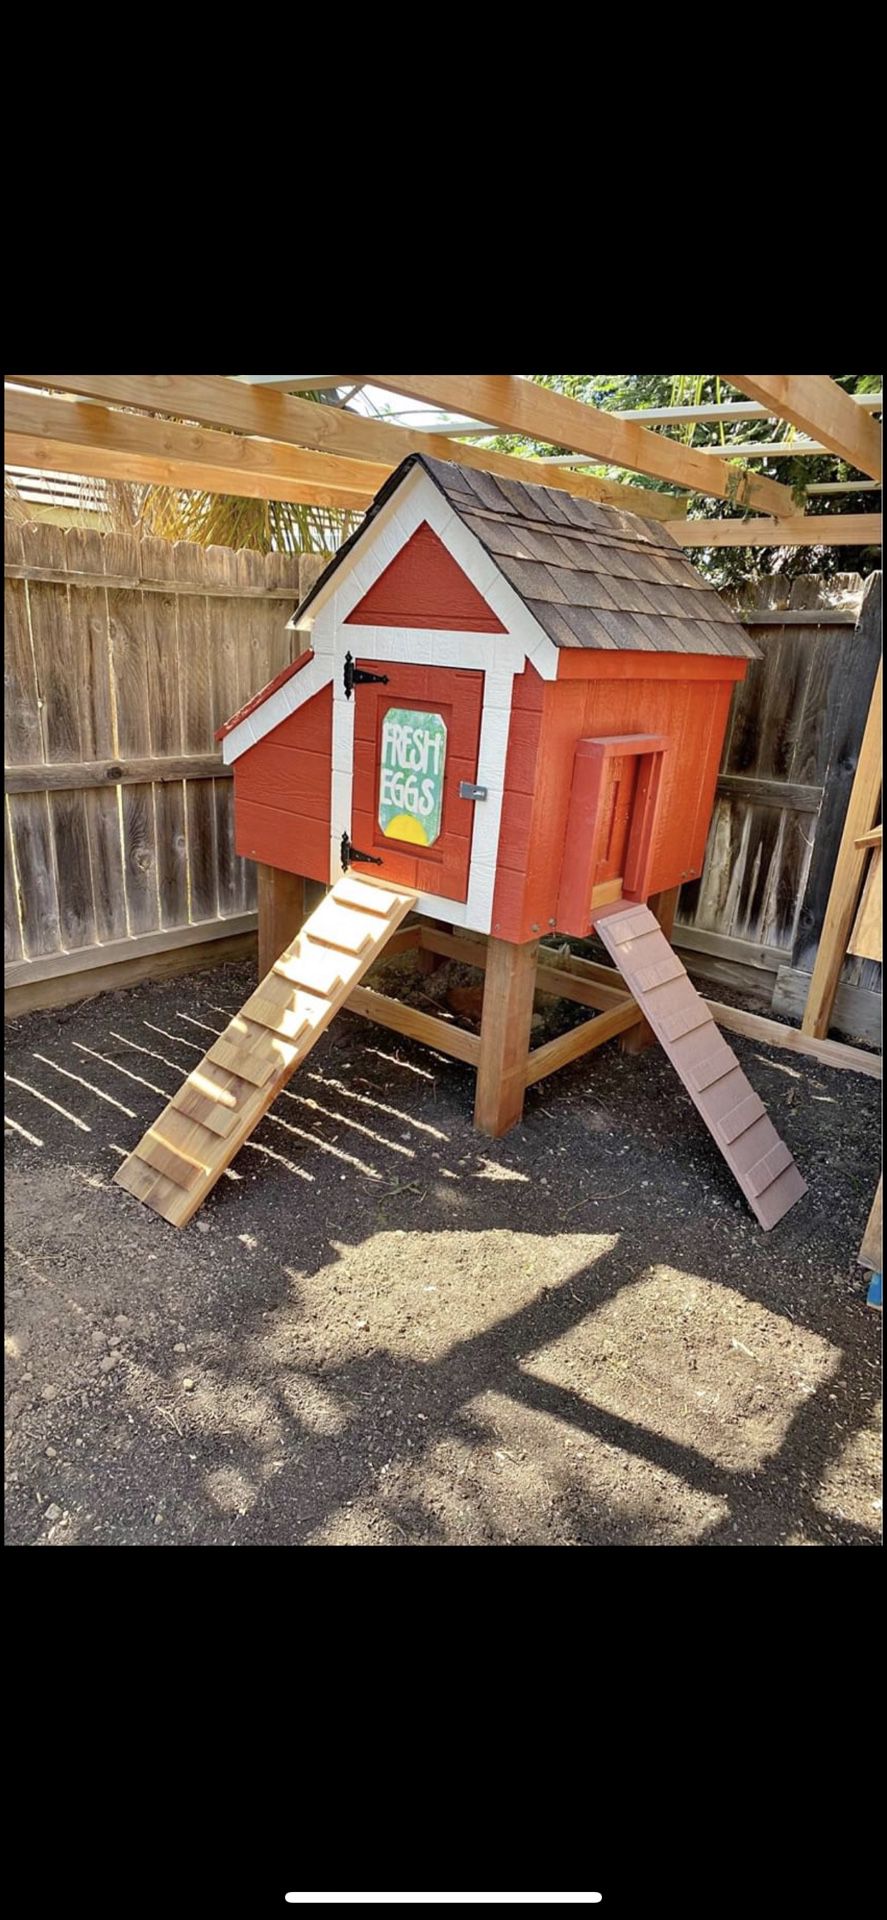 Chicken Coop 48”x45”. Will hold up to 6 chickens comfortably. Removable heat lamp attached.